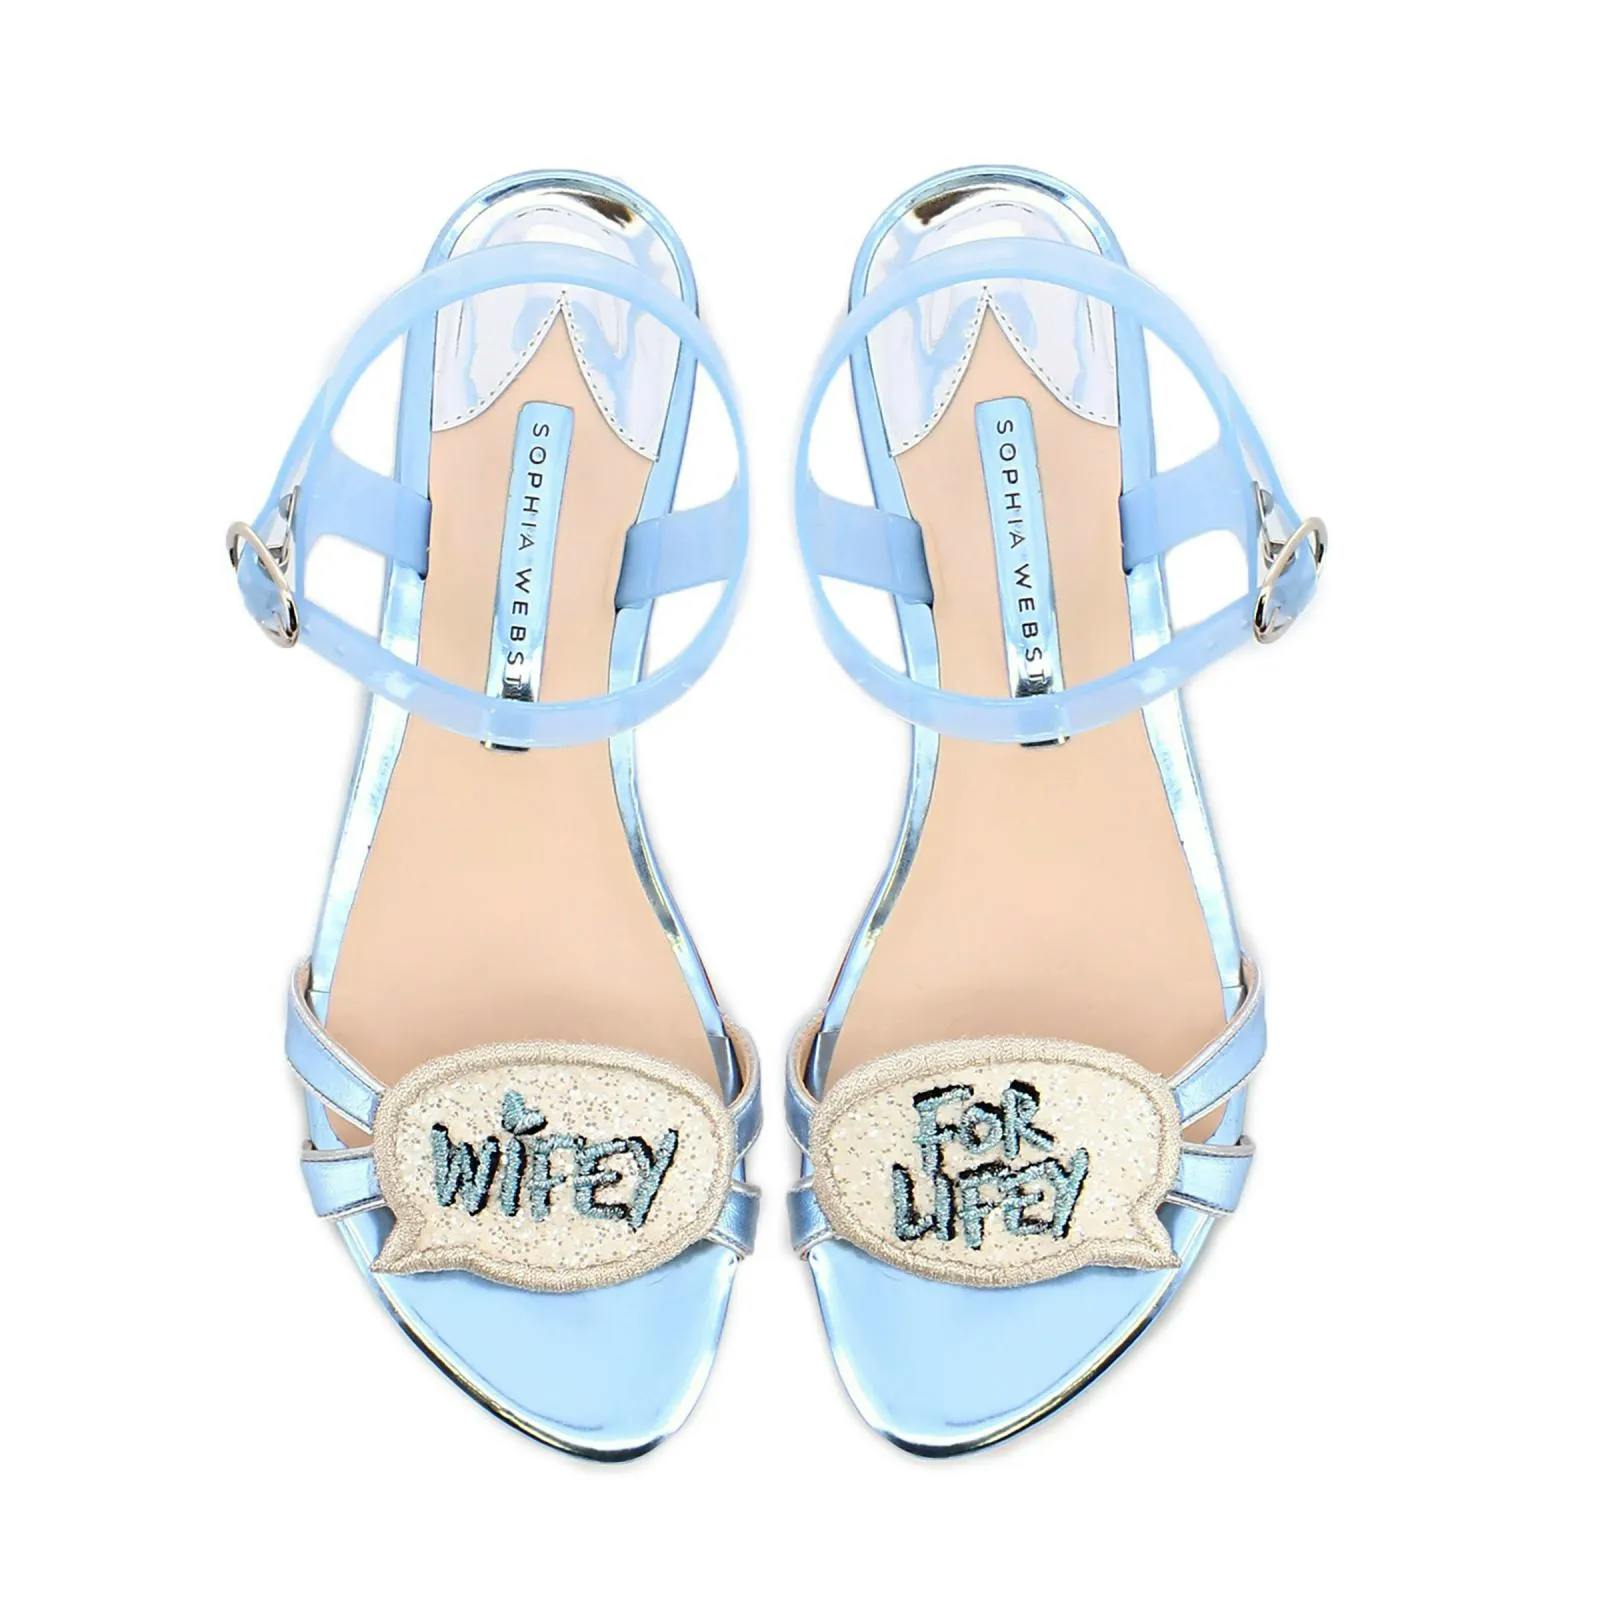 A pair of light blue strappy sandals with glittery speech bubble embellishments. The left shoe has "Wifey" and the right shoe has "For Lifey" written on the embellishments.